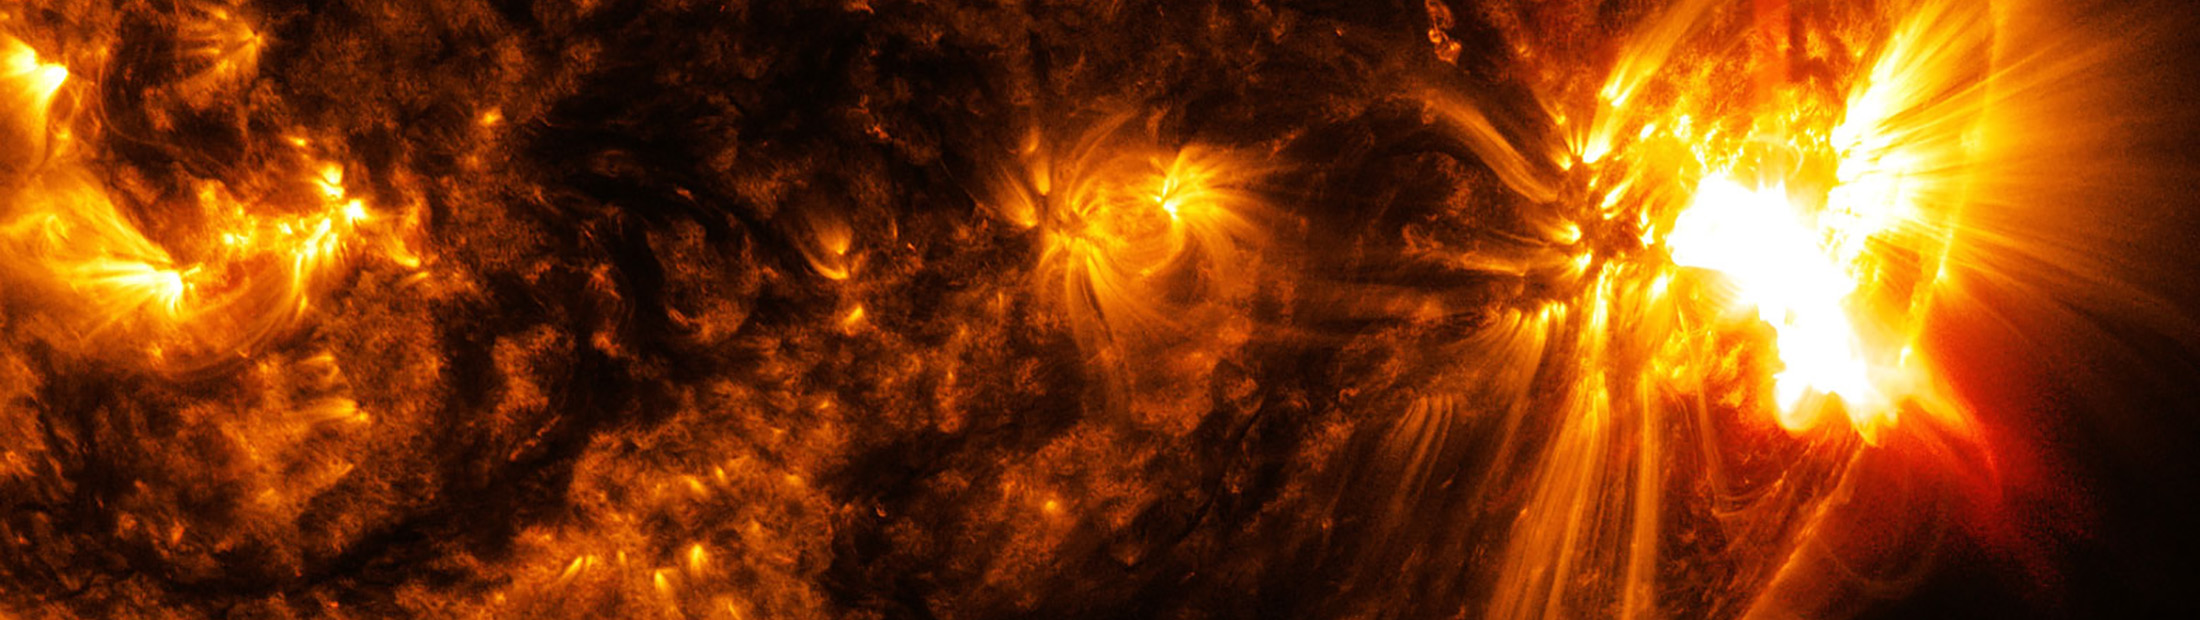 an image of an x2.0-class solar flare bursting off the lower right side of the sun captured by the nasa's solar dynamics observatory